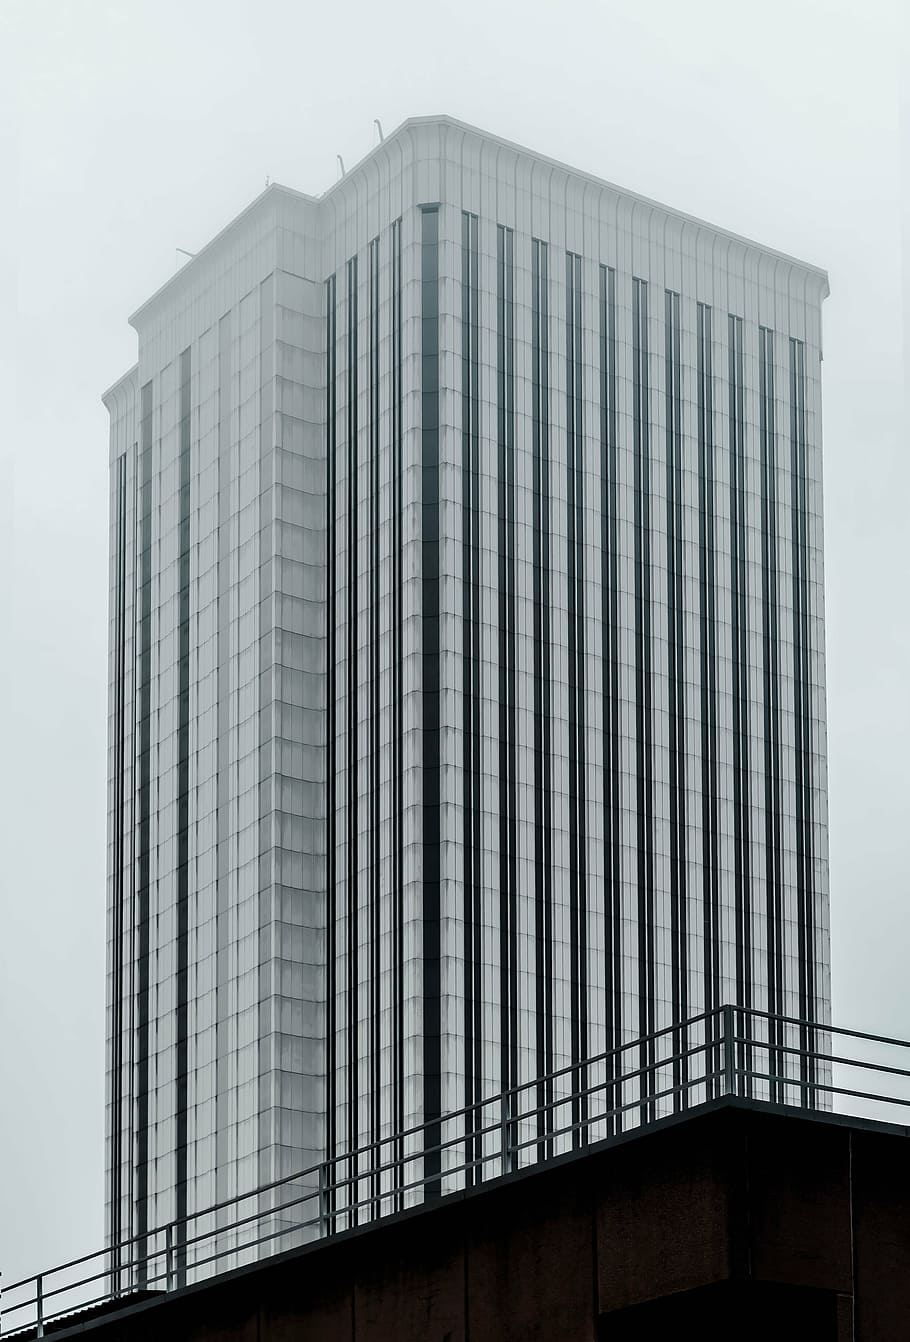 white, high, rise building, gray, sky, daytime, architecture, building, infrastructure, skyscraper